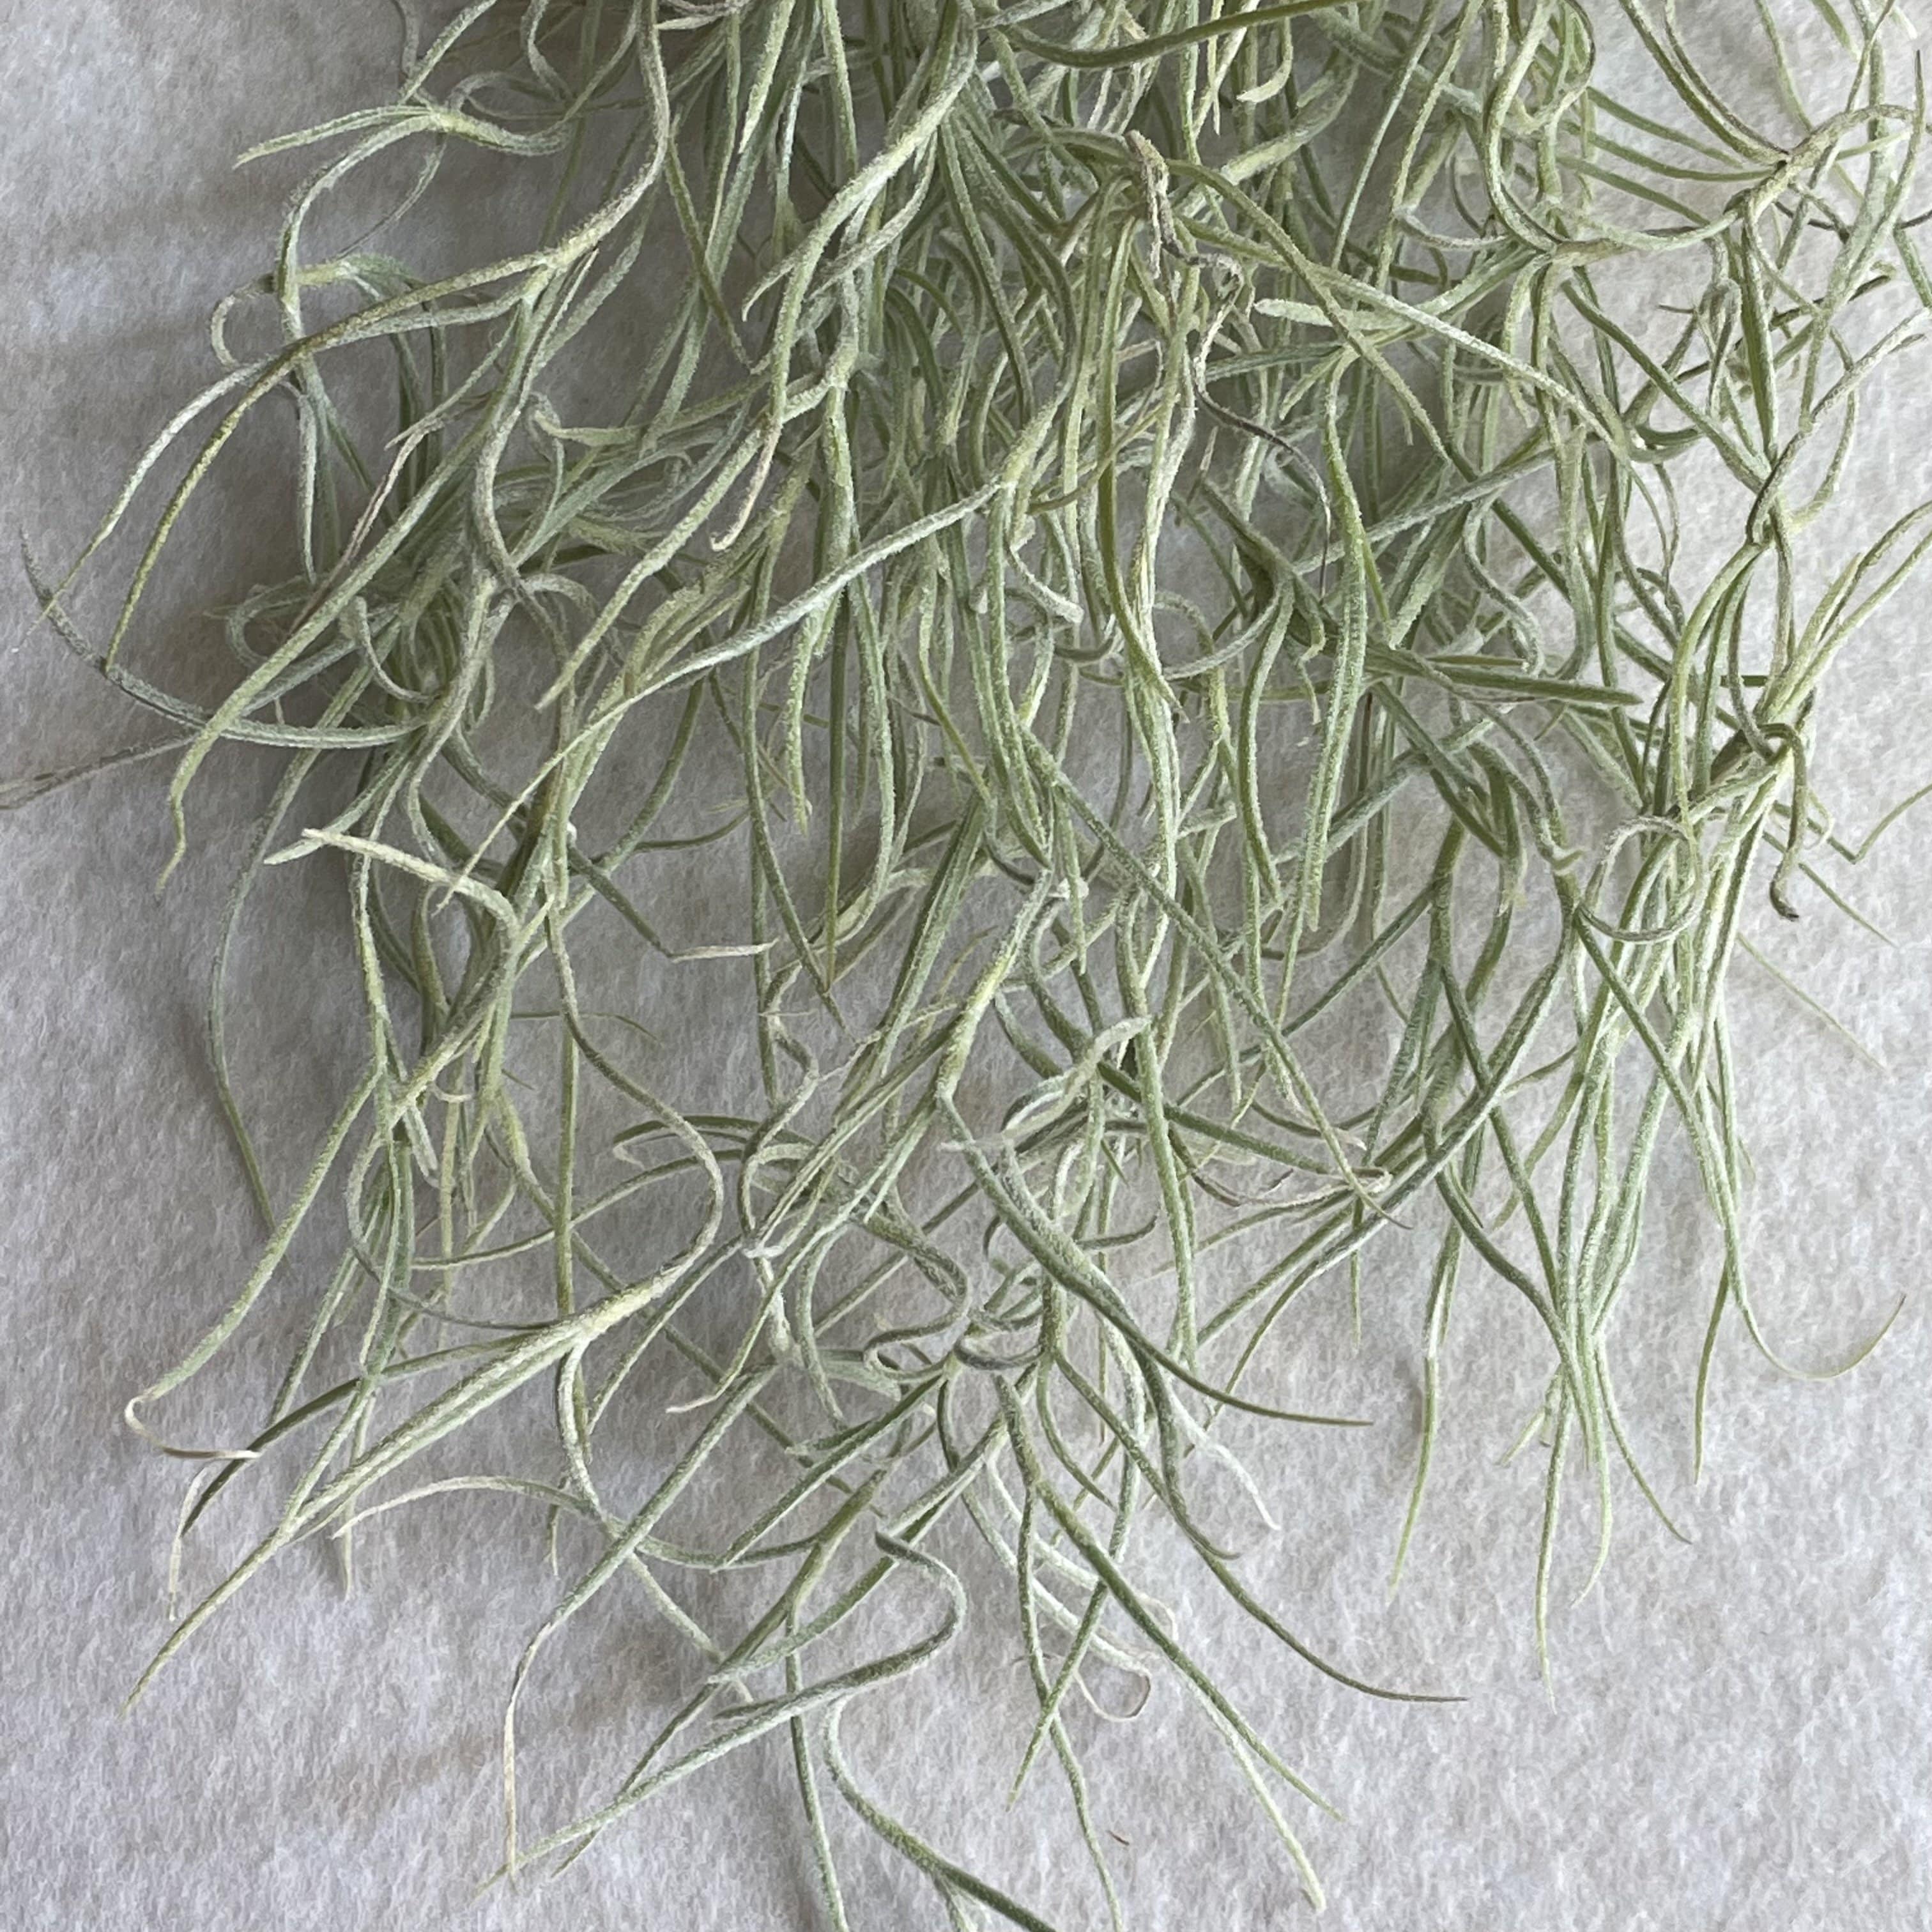 Got this spanish moss as a gift. Any ideas on how to care for it